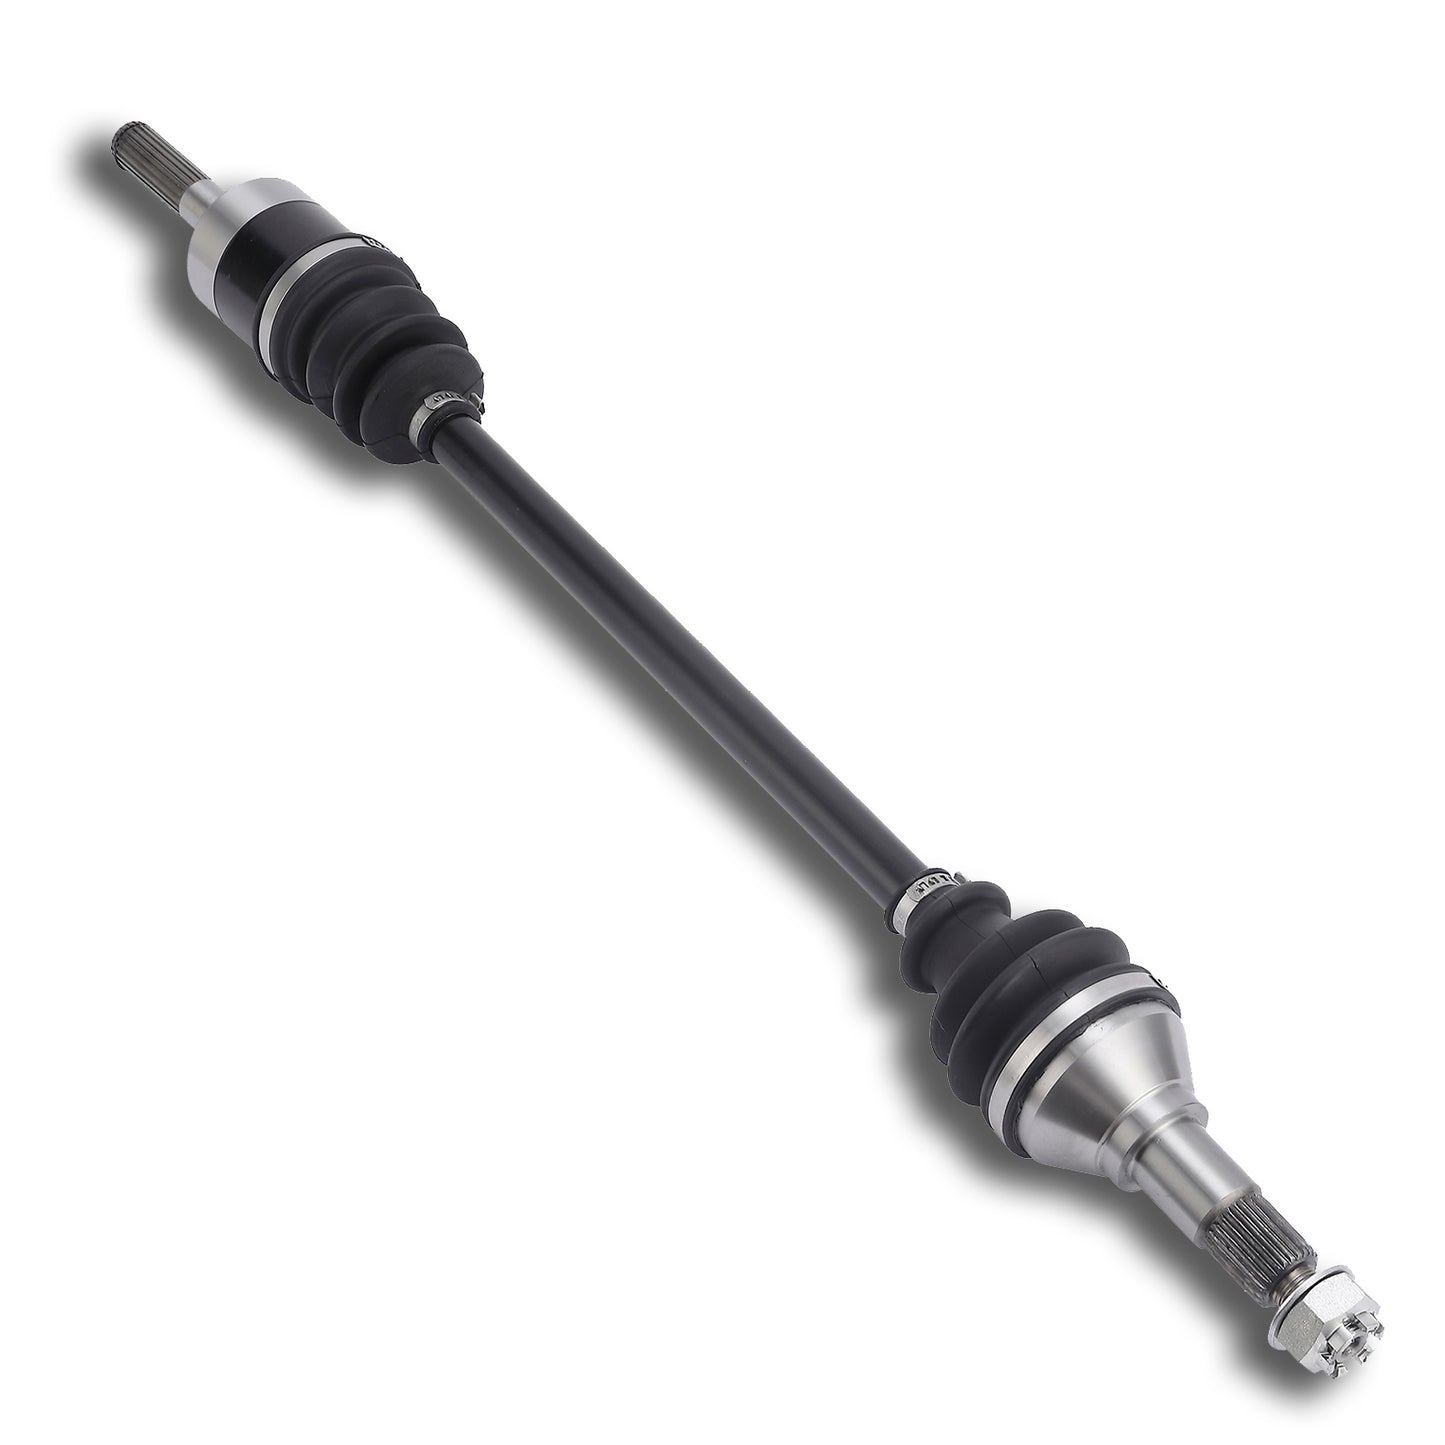 1 CAM-CA117 and 1 CAM-CA-217 Front Left Drive Shaft CV Axle Compatible with CAN AM (2014-2018) Maverick 1000 (Exc. X, XC, XMR, XXC) LF 705401235,705401873